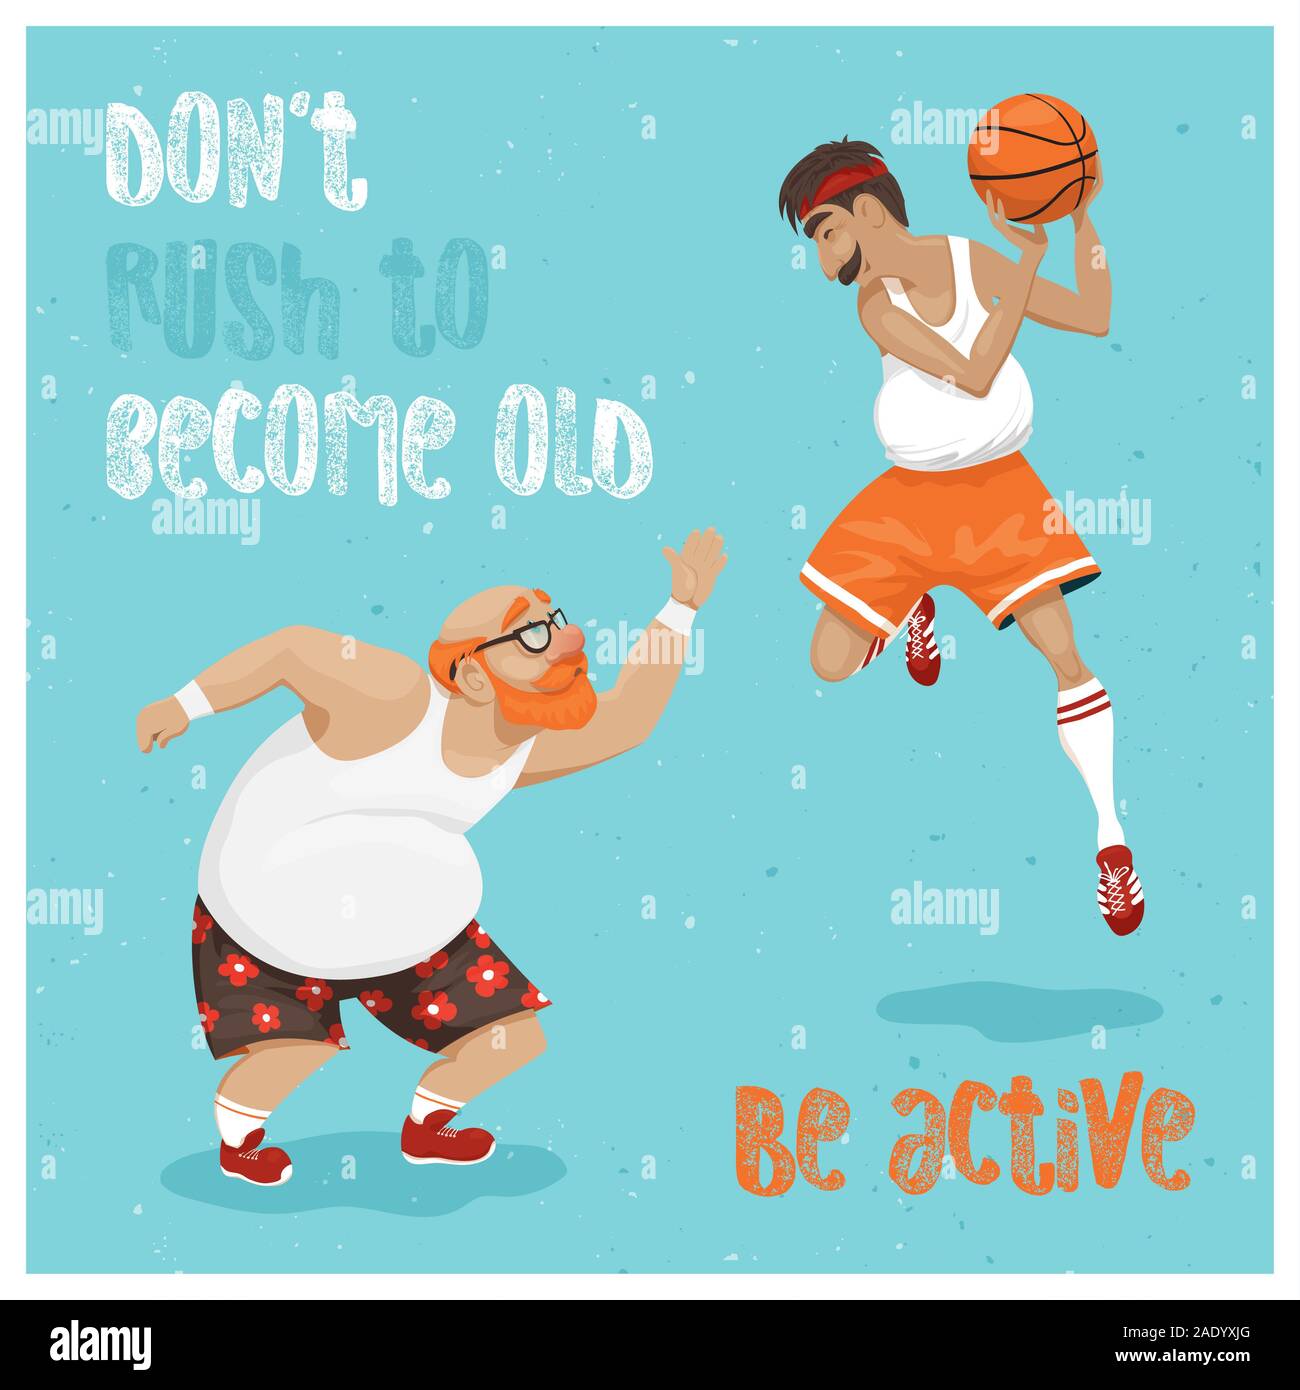 a vector illustration with two old men (neighbours or friends) playing basketball; active lifestyle promotion; motivating poster or greeting card in c Stock Photo